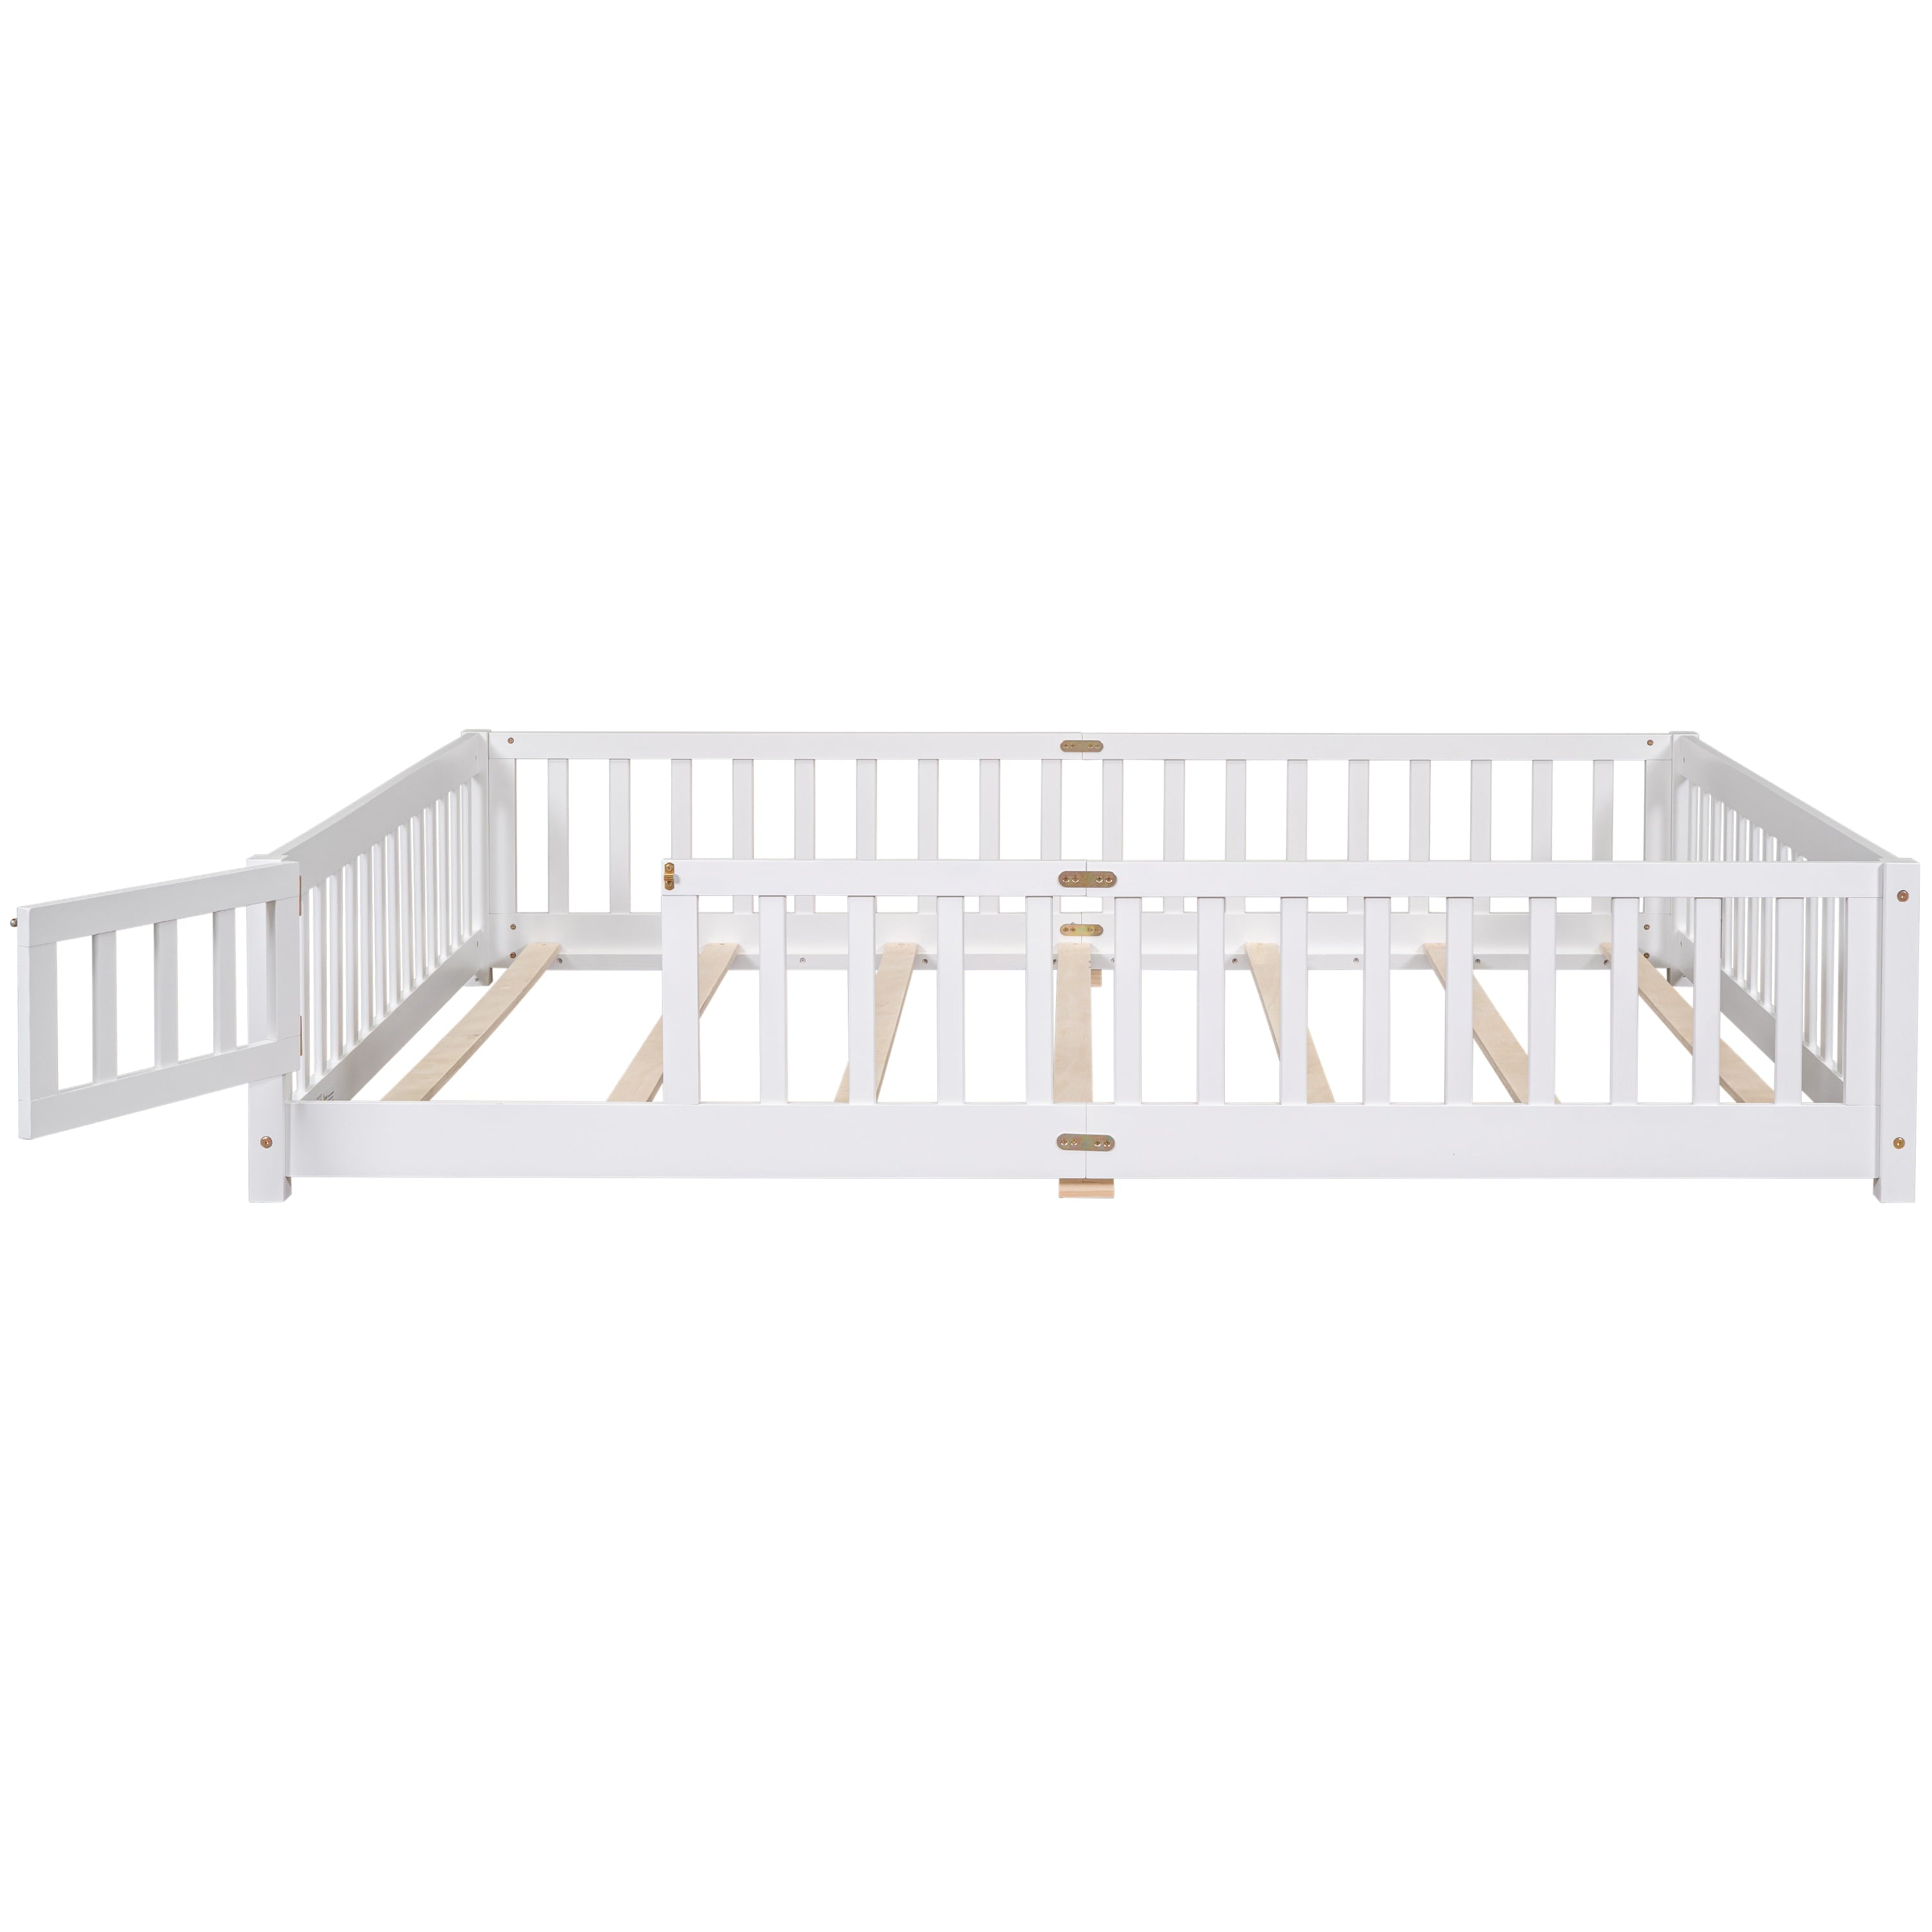 uhomepro Queen Size Wood Floor Bed Frame with Fence and Door for Kids, Toddlers, White